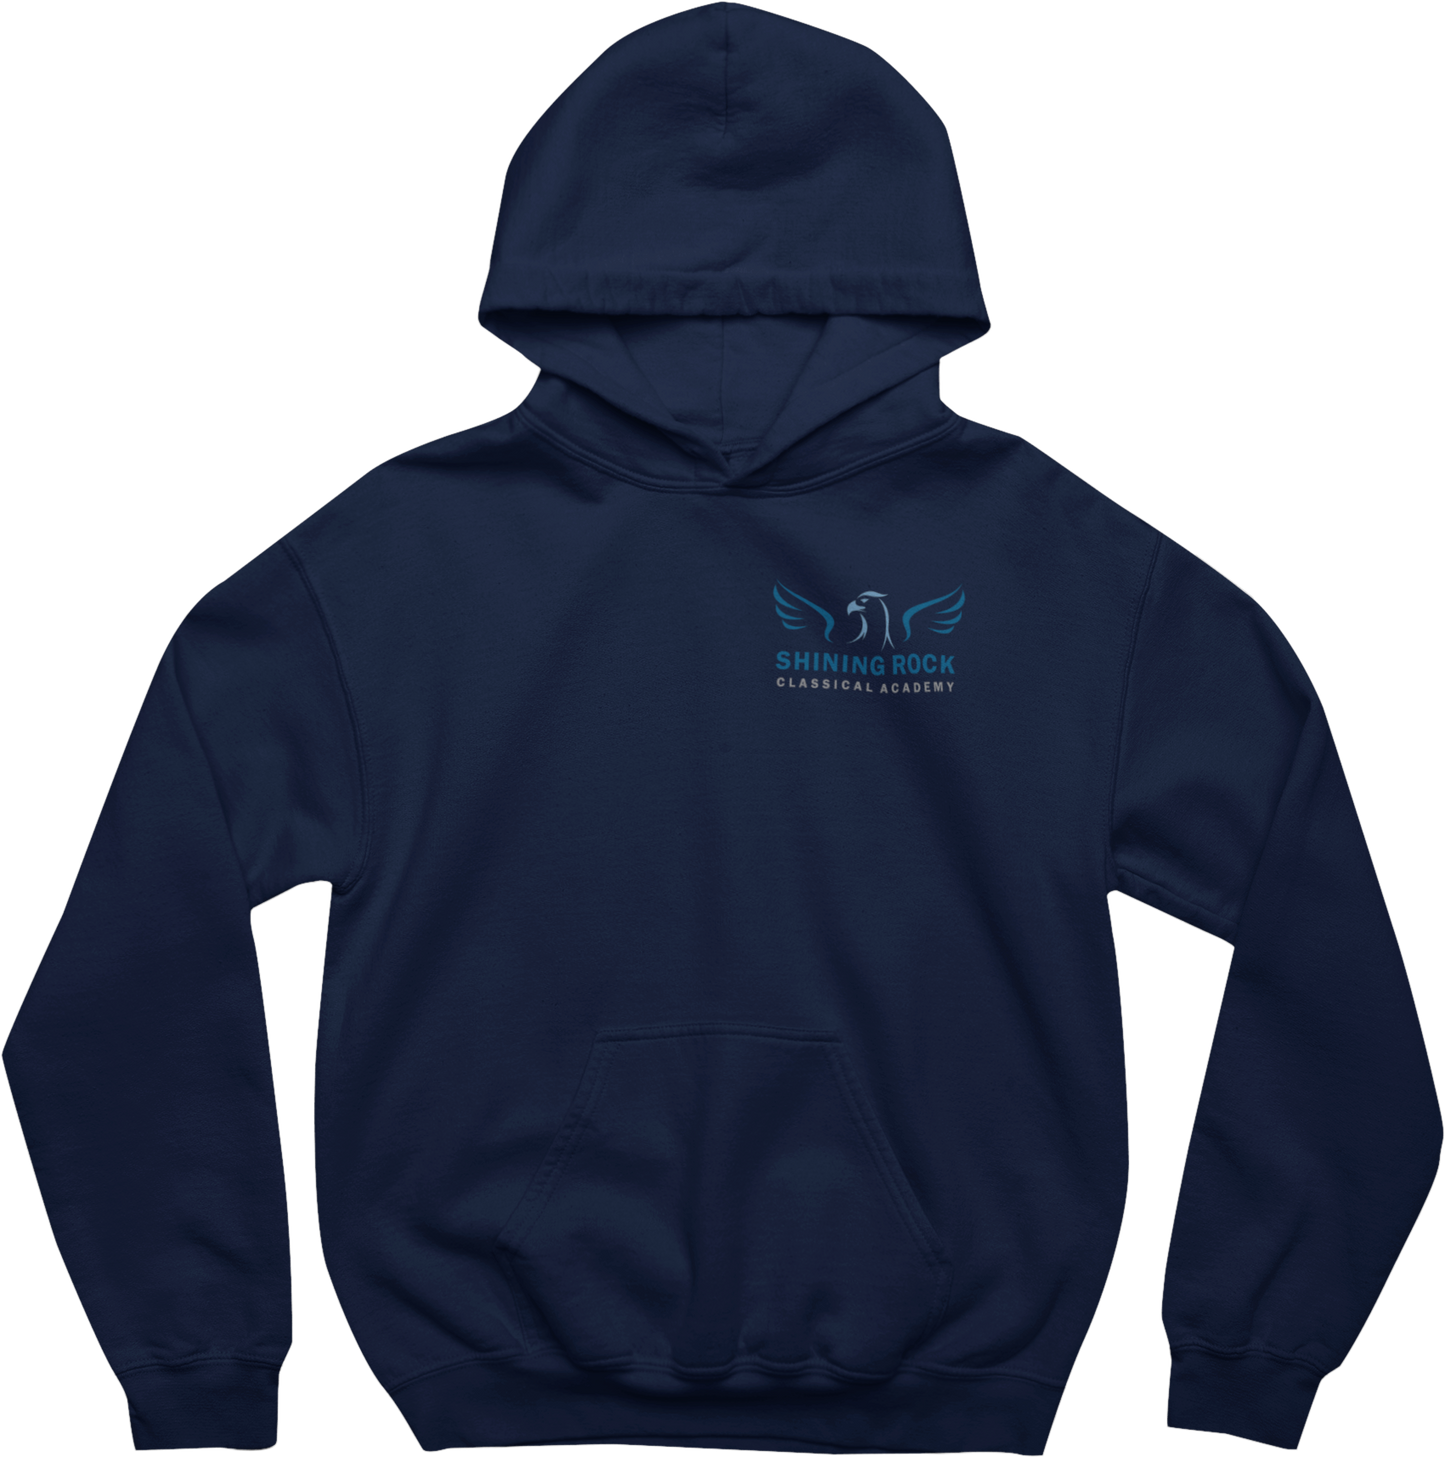 Shining Rock Classical Academy Embroidered School Hoodies - Pullover or Zippered